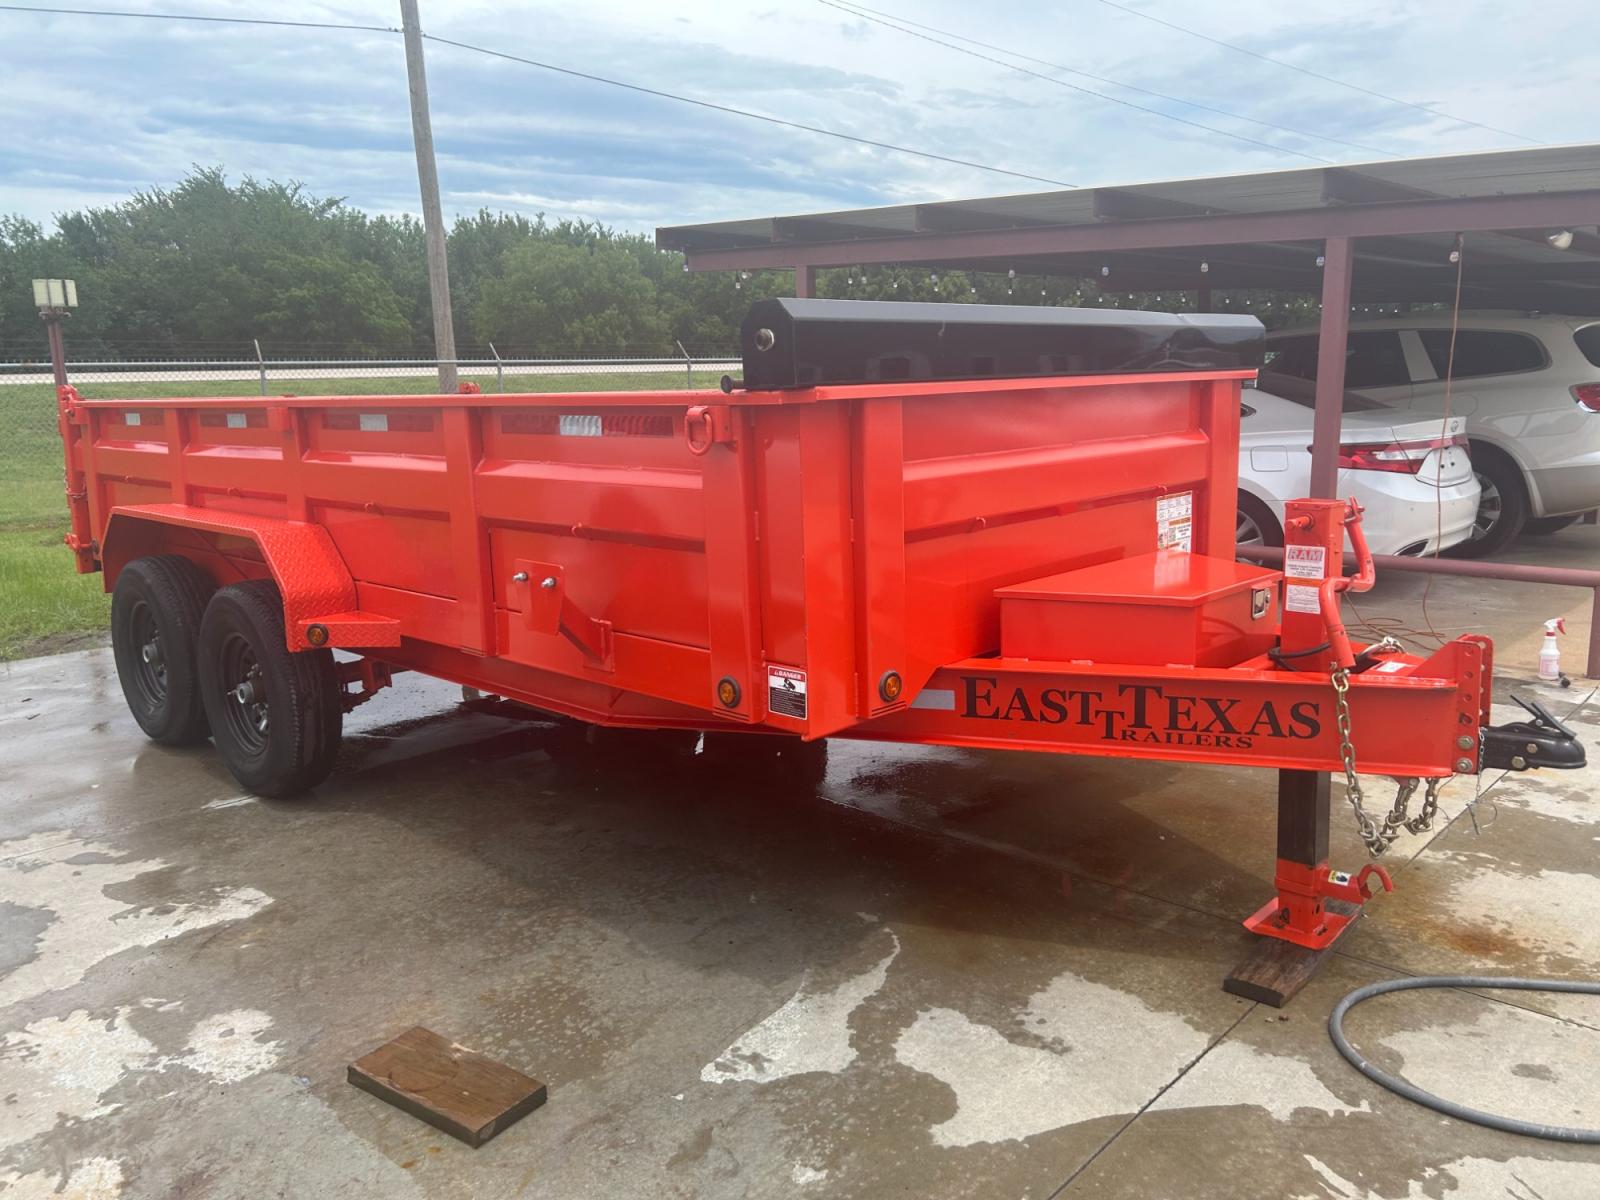 2023 ORANGE EAST TEXAS TRAILER DUMPBED (58SBD1627PE) , located at 17760 Hwy 62, Morris, OK, 74445, 35.609104, -95.877060 - 2023 EAST TEXAS DUMP BED TRAILER IS 16X83, 14,000 GVWR, 2-7000 LB DEXTER ELECTRIC BREAK SYSTEM, TONGUE MOUNTED TOOL BOX, 7 GA FLOOR, 80" SLIDE IN RAMPS, 7 WAY PLUG, LED LIGHTS, 24" HIGH 10 GA. SIDES, 6" 12 LB I-BEAM FRAME, 6" 12 LB I-BEAM TONGUE. TITLE IN HAND. TRAILER IS BASICALLY NEW AND HAS ONLY - Photo #0